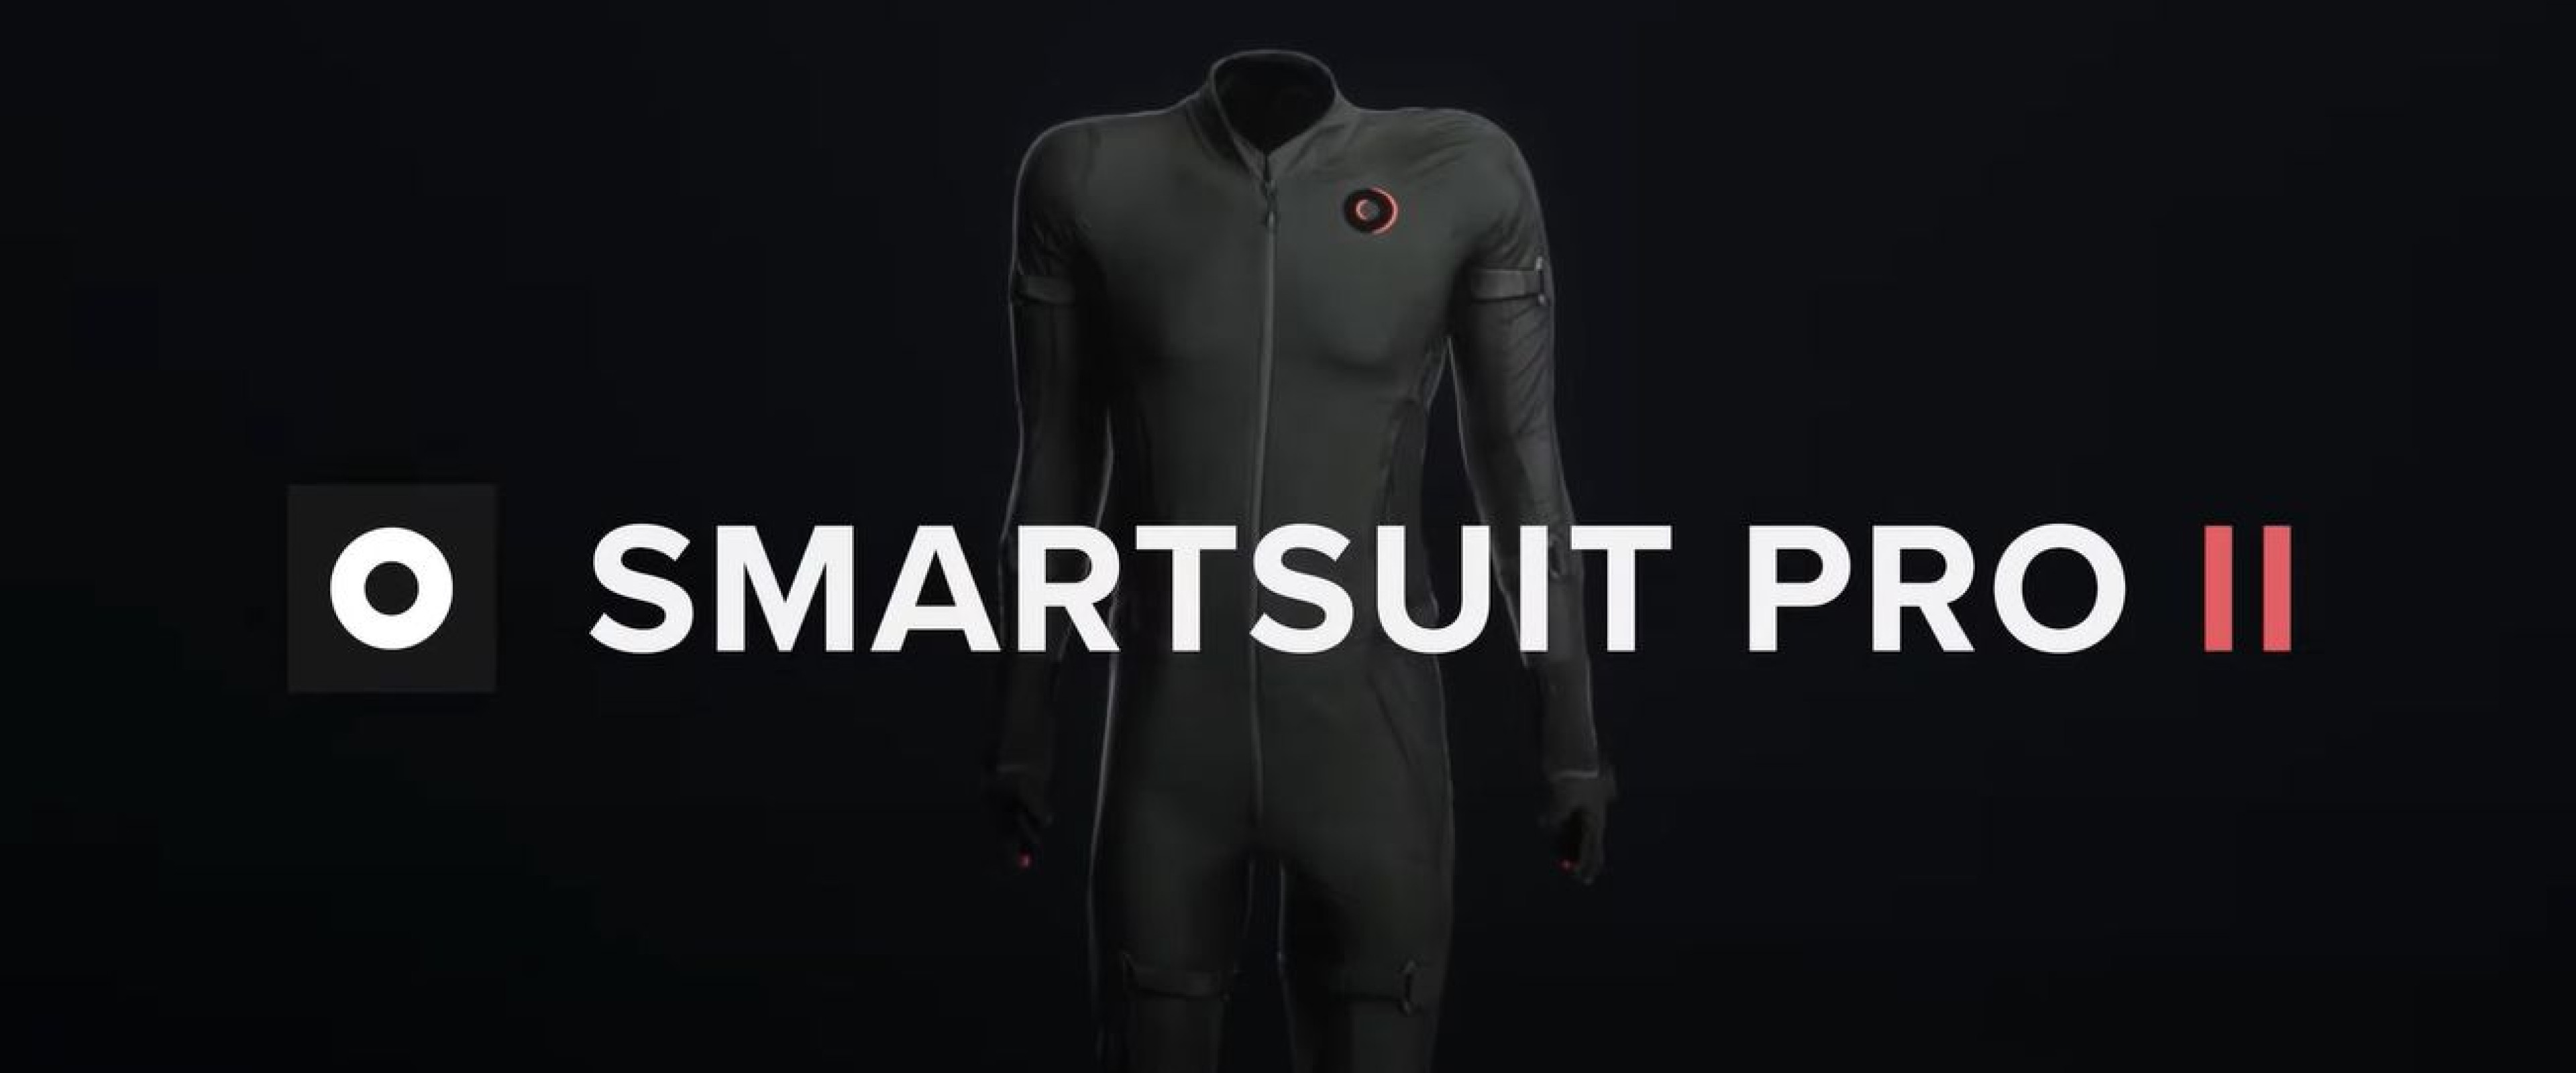 Shows Rokoko's Smartsuit Pro II, which is used for motion capture.